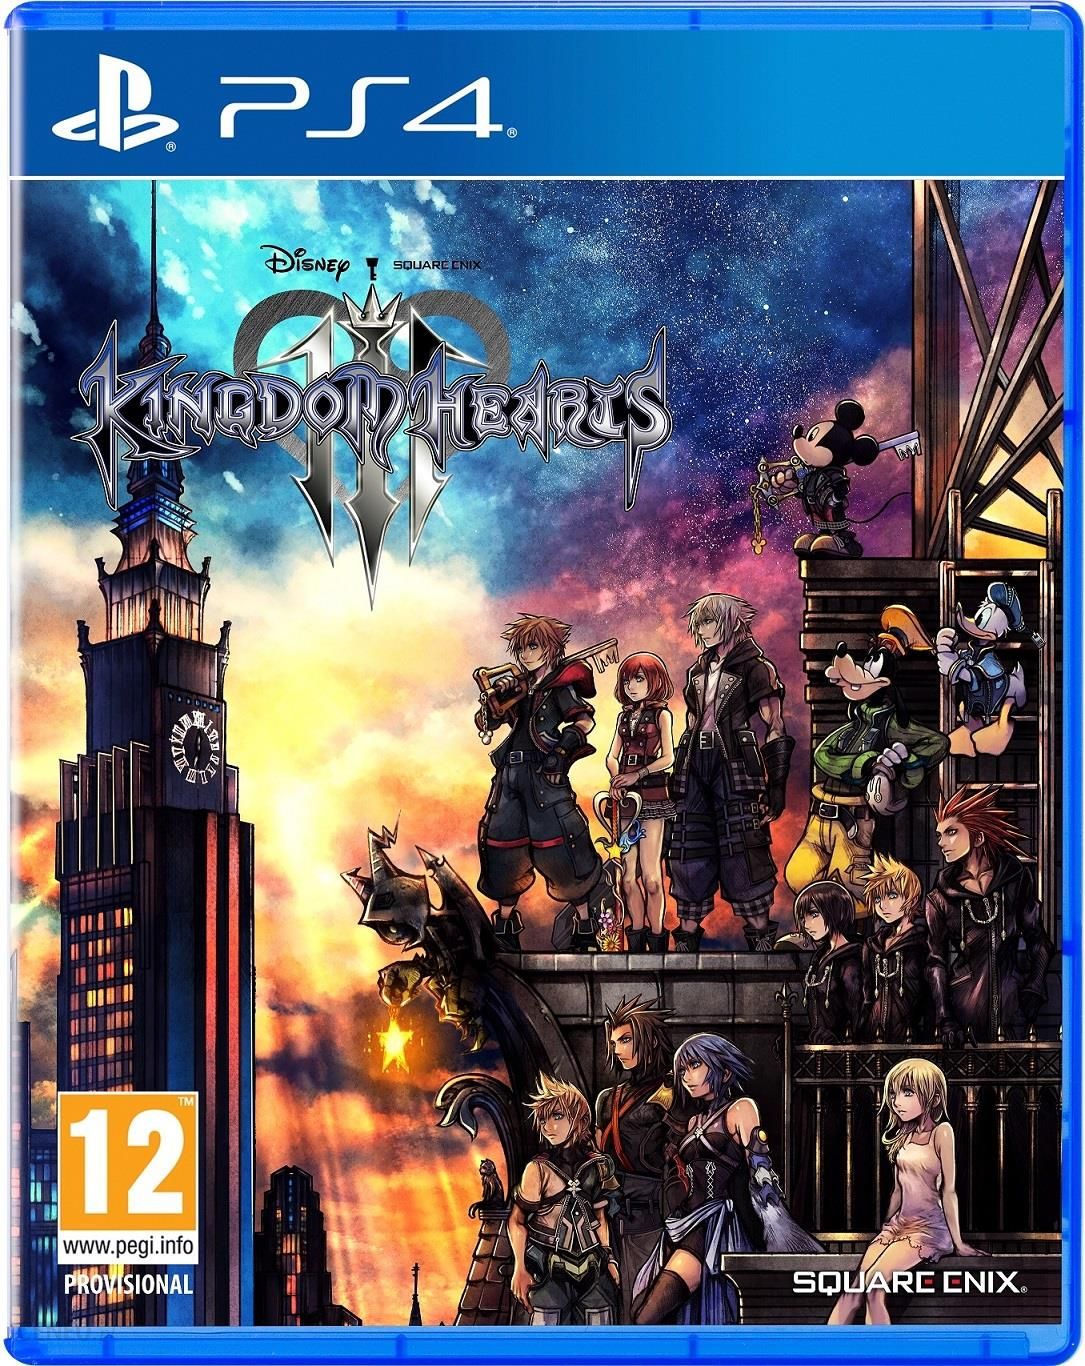 kingdom hearts iii deluxe edition comes with